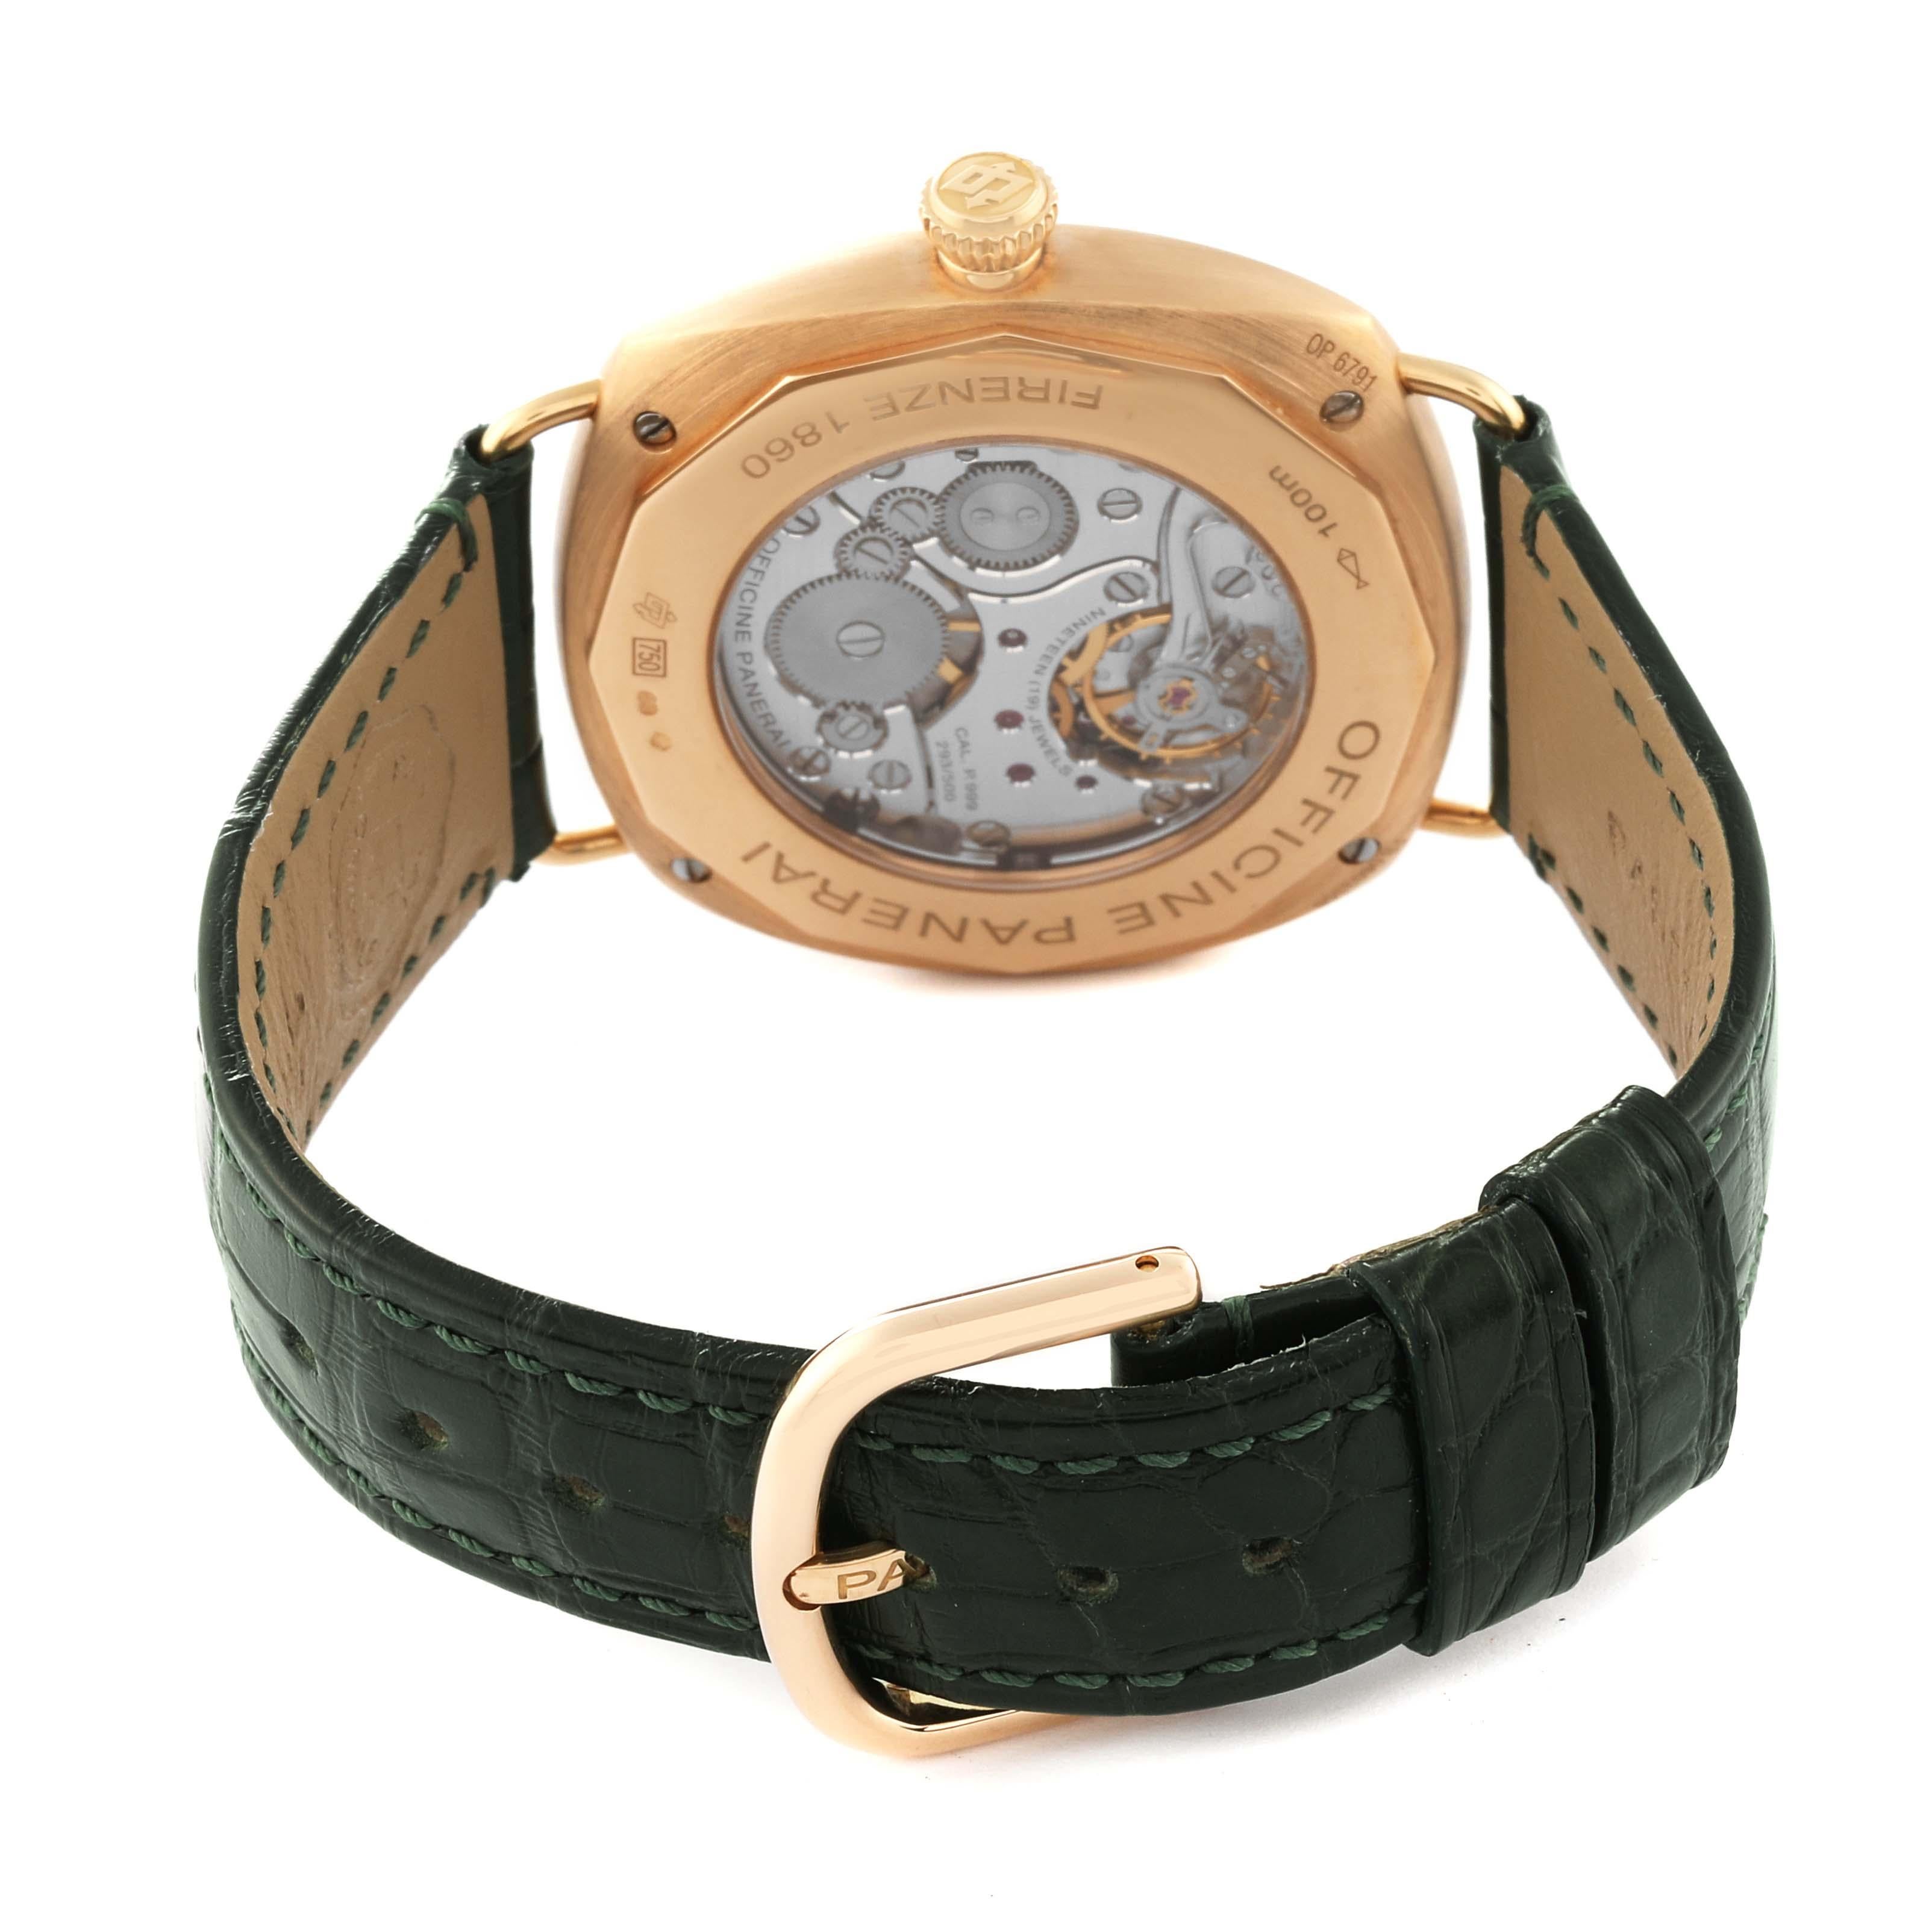 Men's Panerai Radiomir Limited Edition Rose Gold Mens Watch PAM00336 Box Papers For Sale